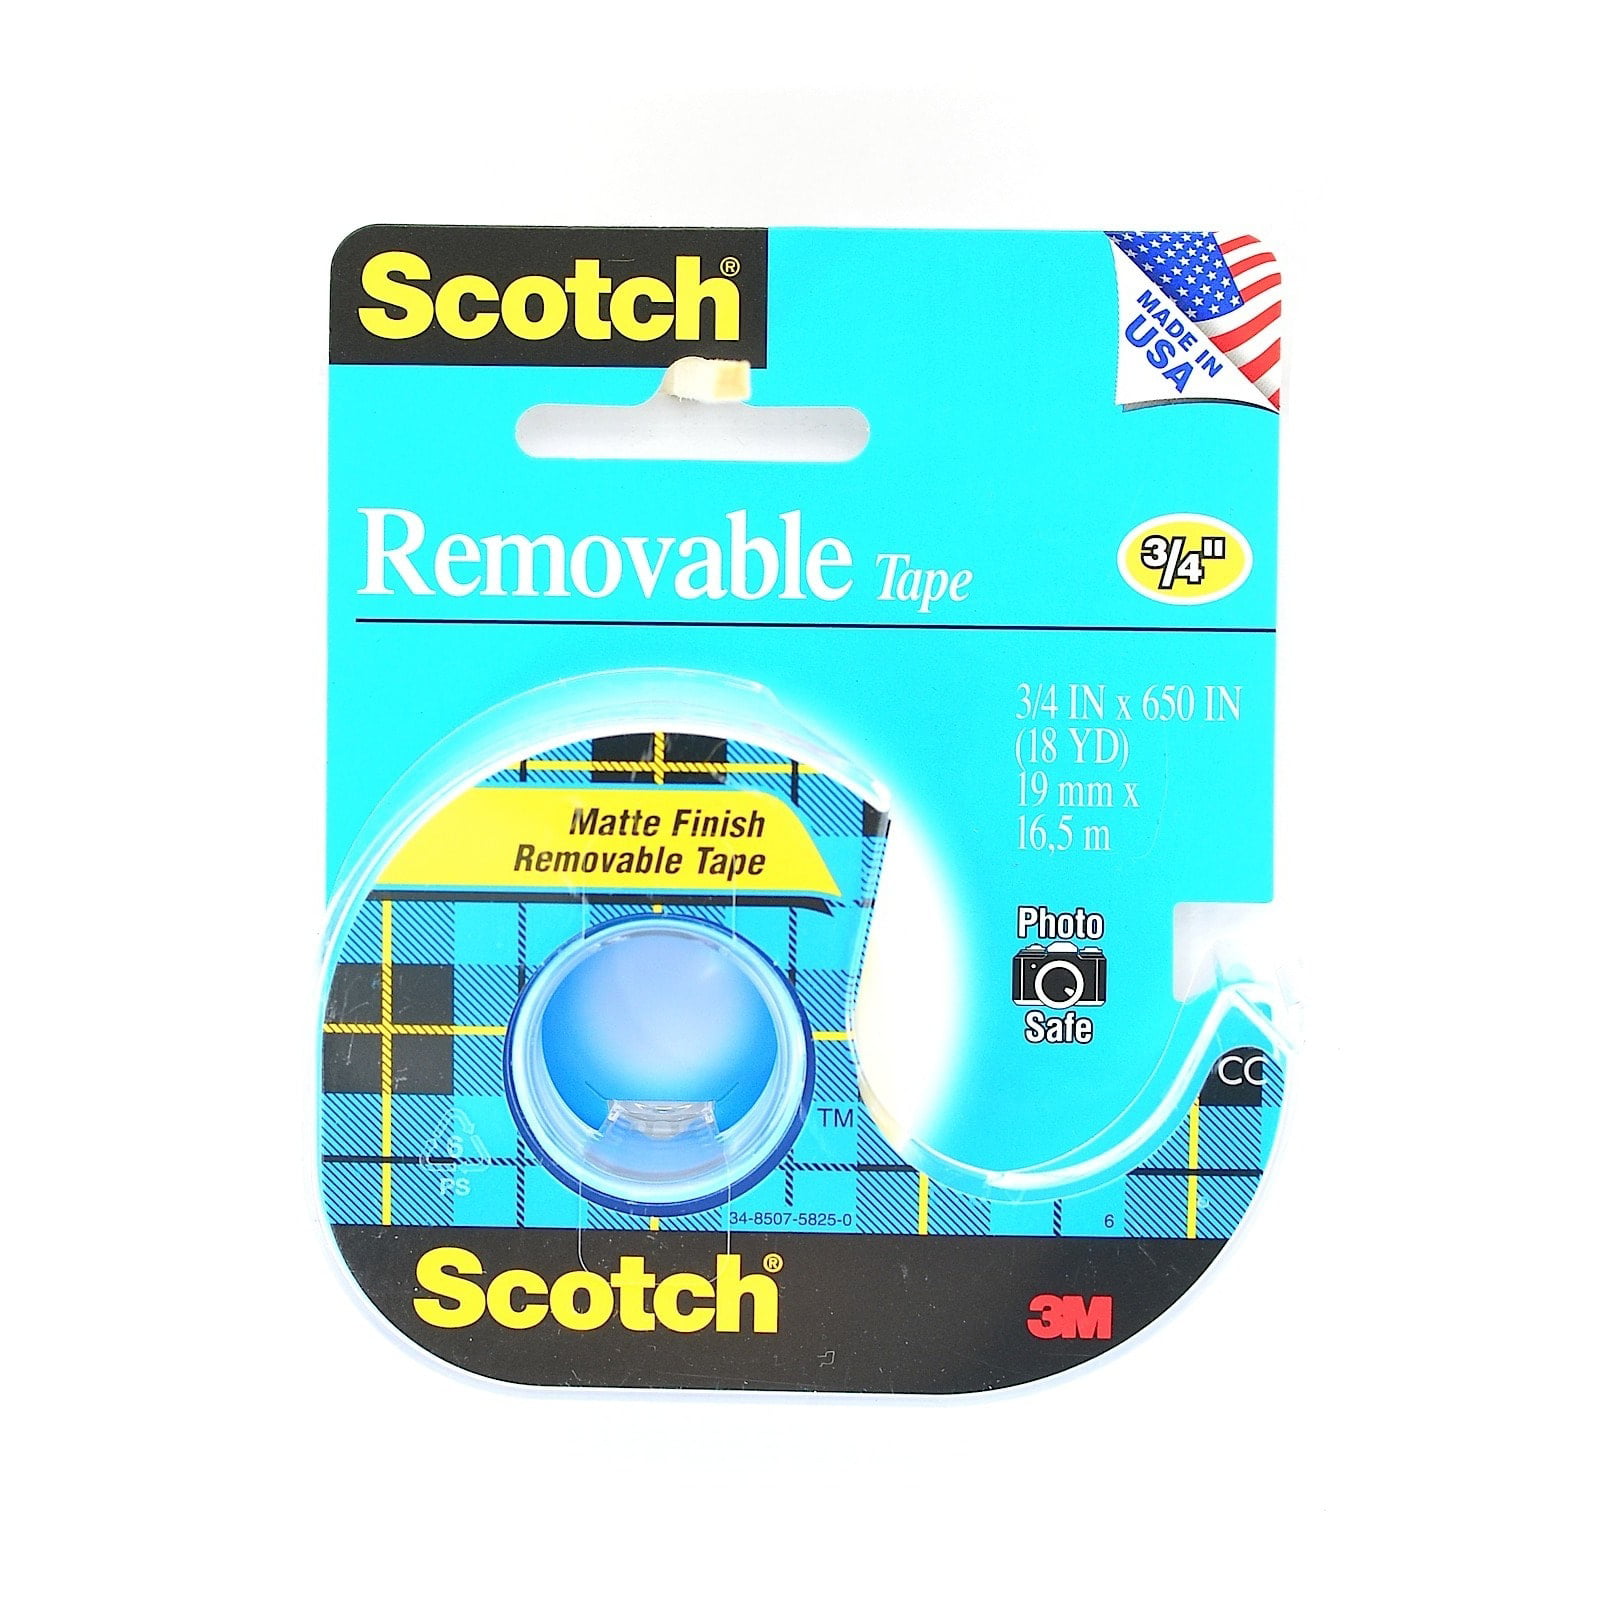 6 Pack of 3M 811 Scotch Magic Removable Tape Matte Finish 1" Wide 